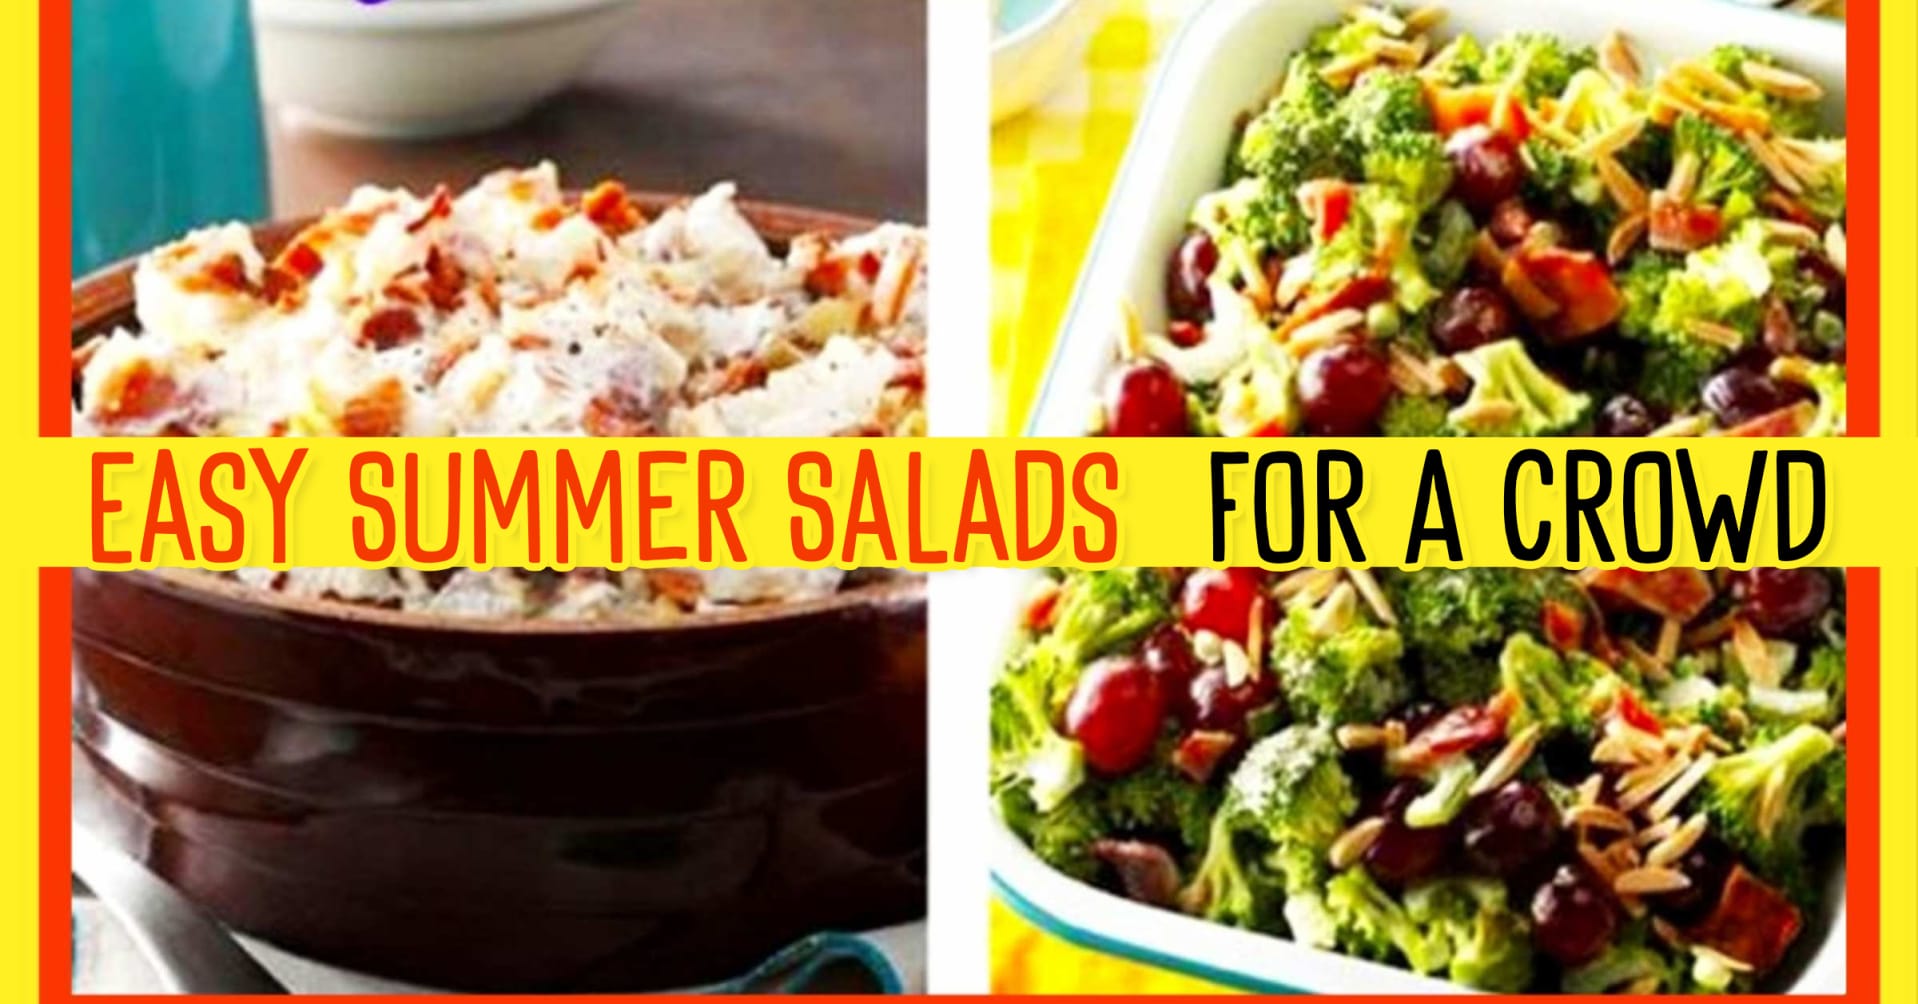 Easy Summer Salads For Parties, Large Groups, Picnics, Potlucks and BBQ Cookouts •  Summer Salad Recipes MY Crowd LOVES – Easy Make Ahead Salads for a Crowd or large group